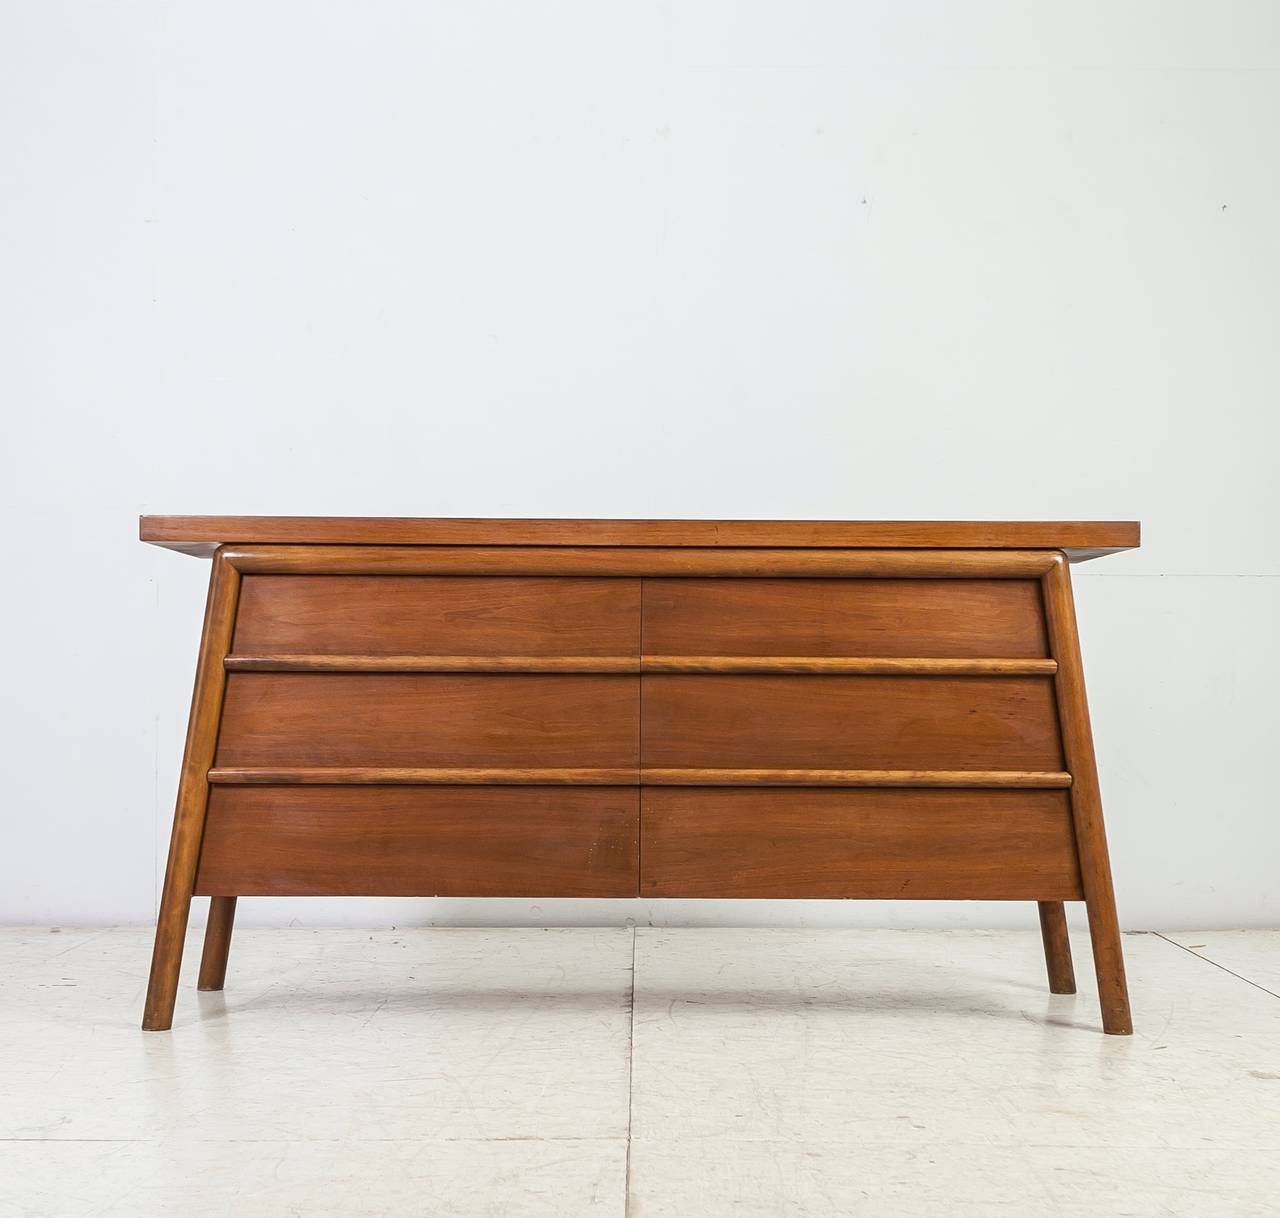 A 1950s wooden sideboard by T.H. Robsjohn-Gibbings for Widdicomb. The sideboard has six large drawers, with subtle, rounded pulls over the full length of the drawers.
This piece has a wonderful warm patina and is labeled by Widdicomb.